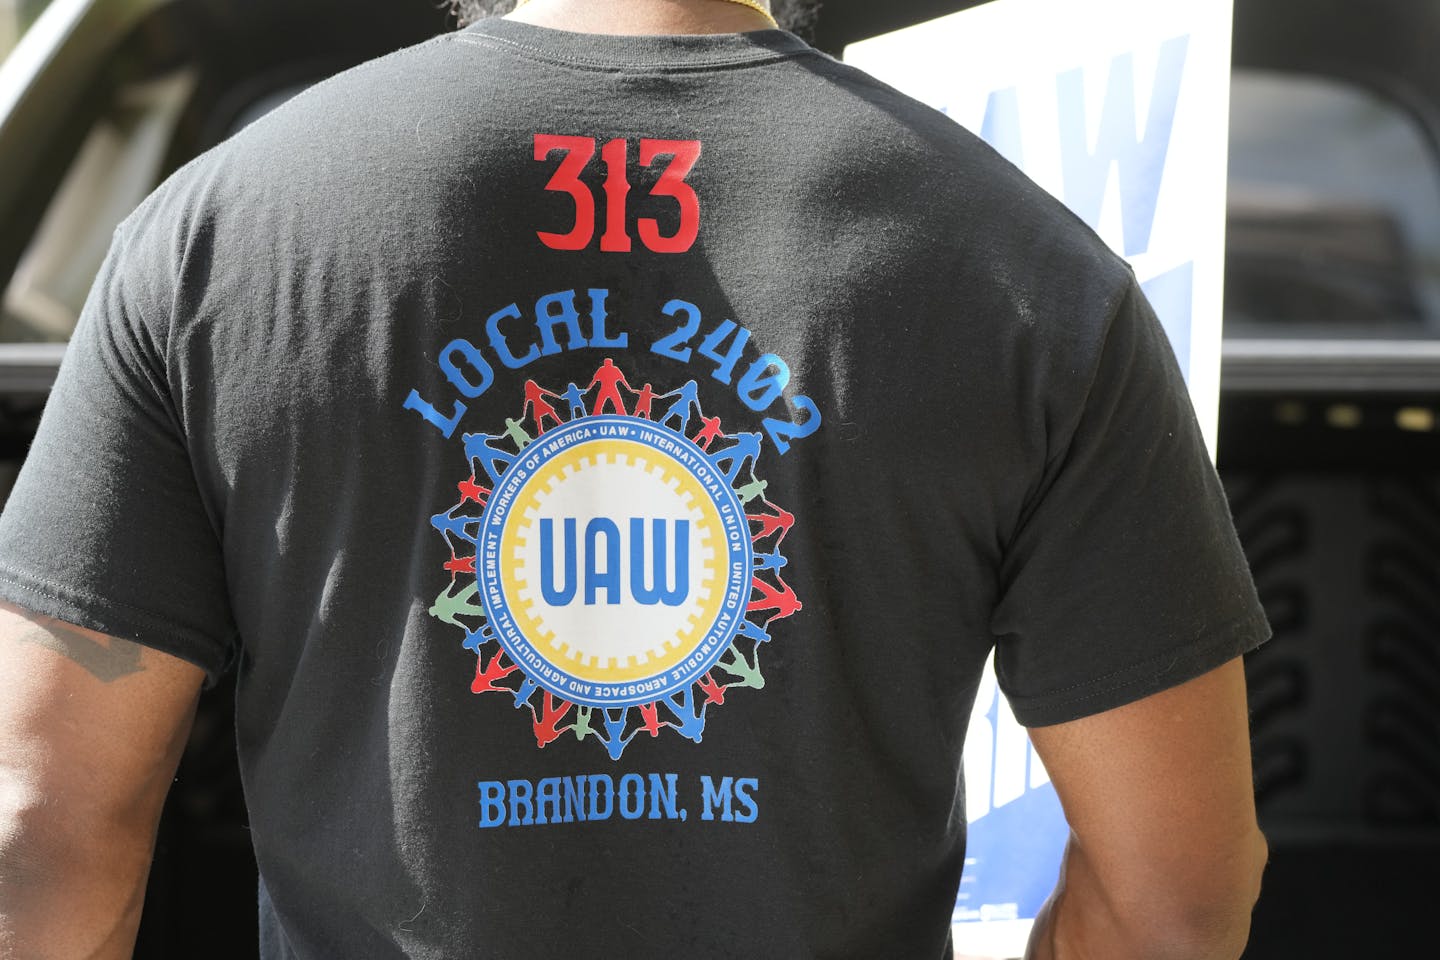 The back of a worker wearing a UAW t-shirt indicating employment in Brandon, Miss.